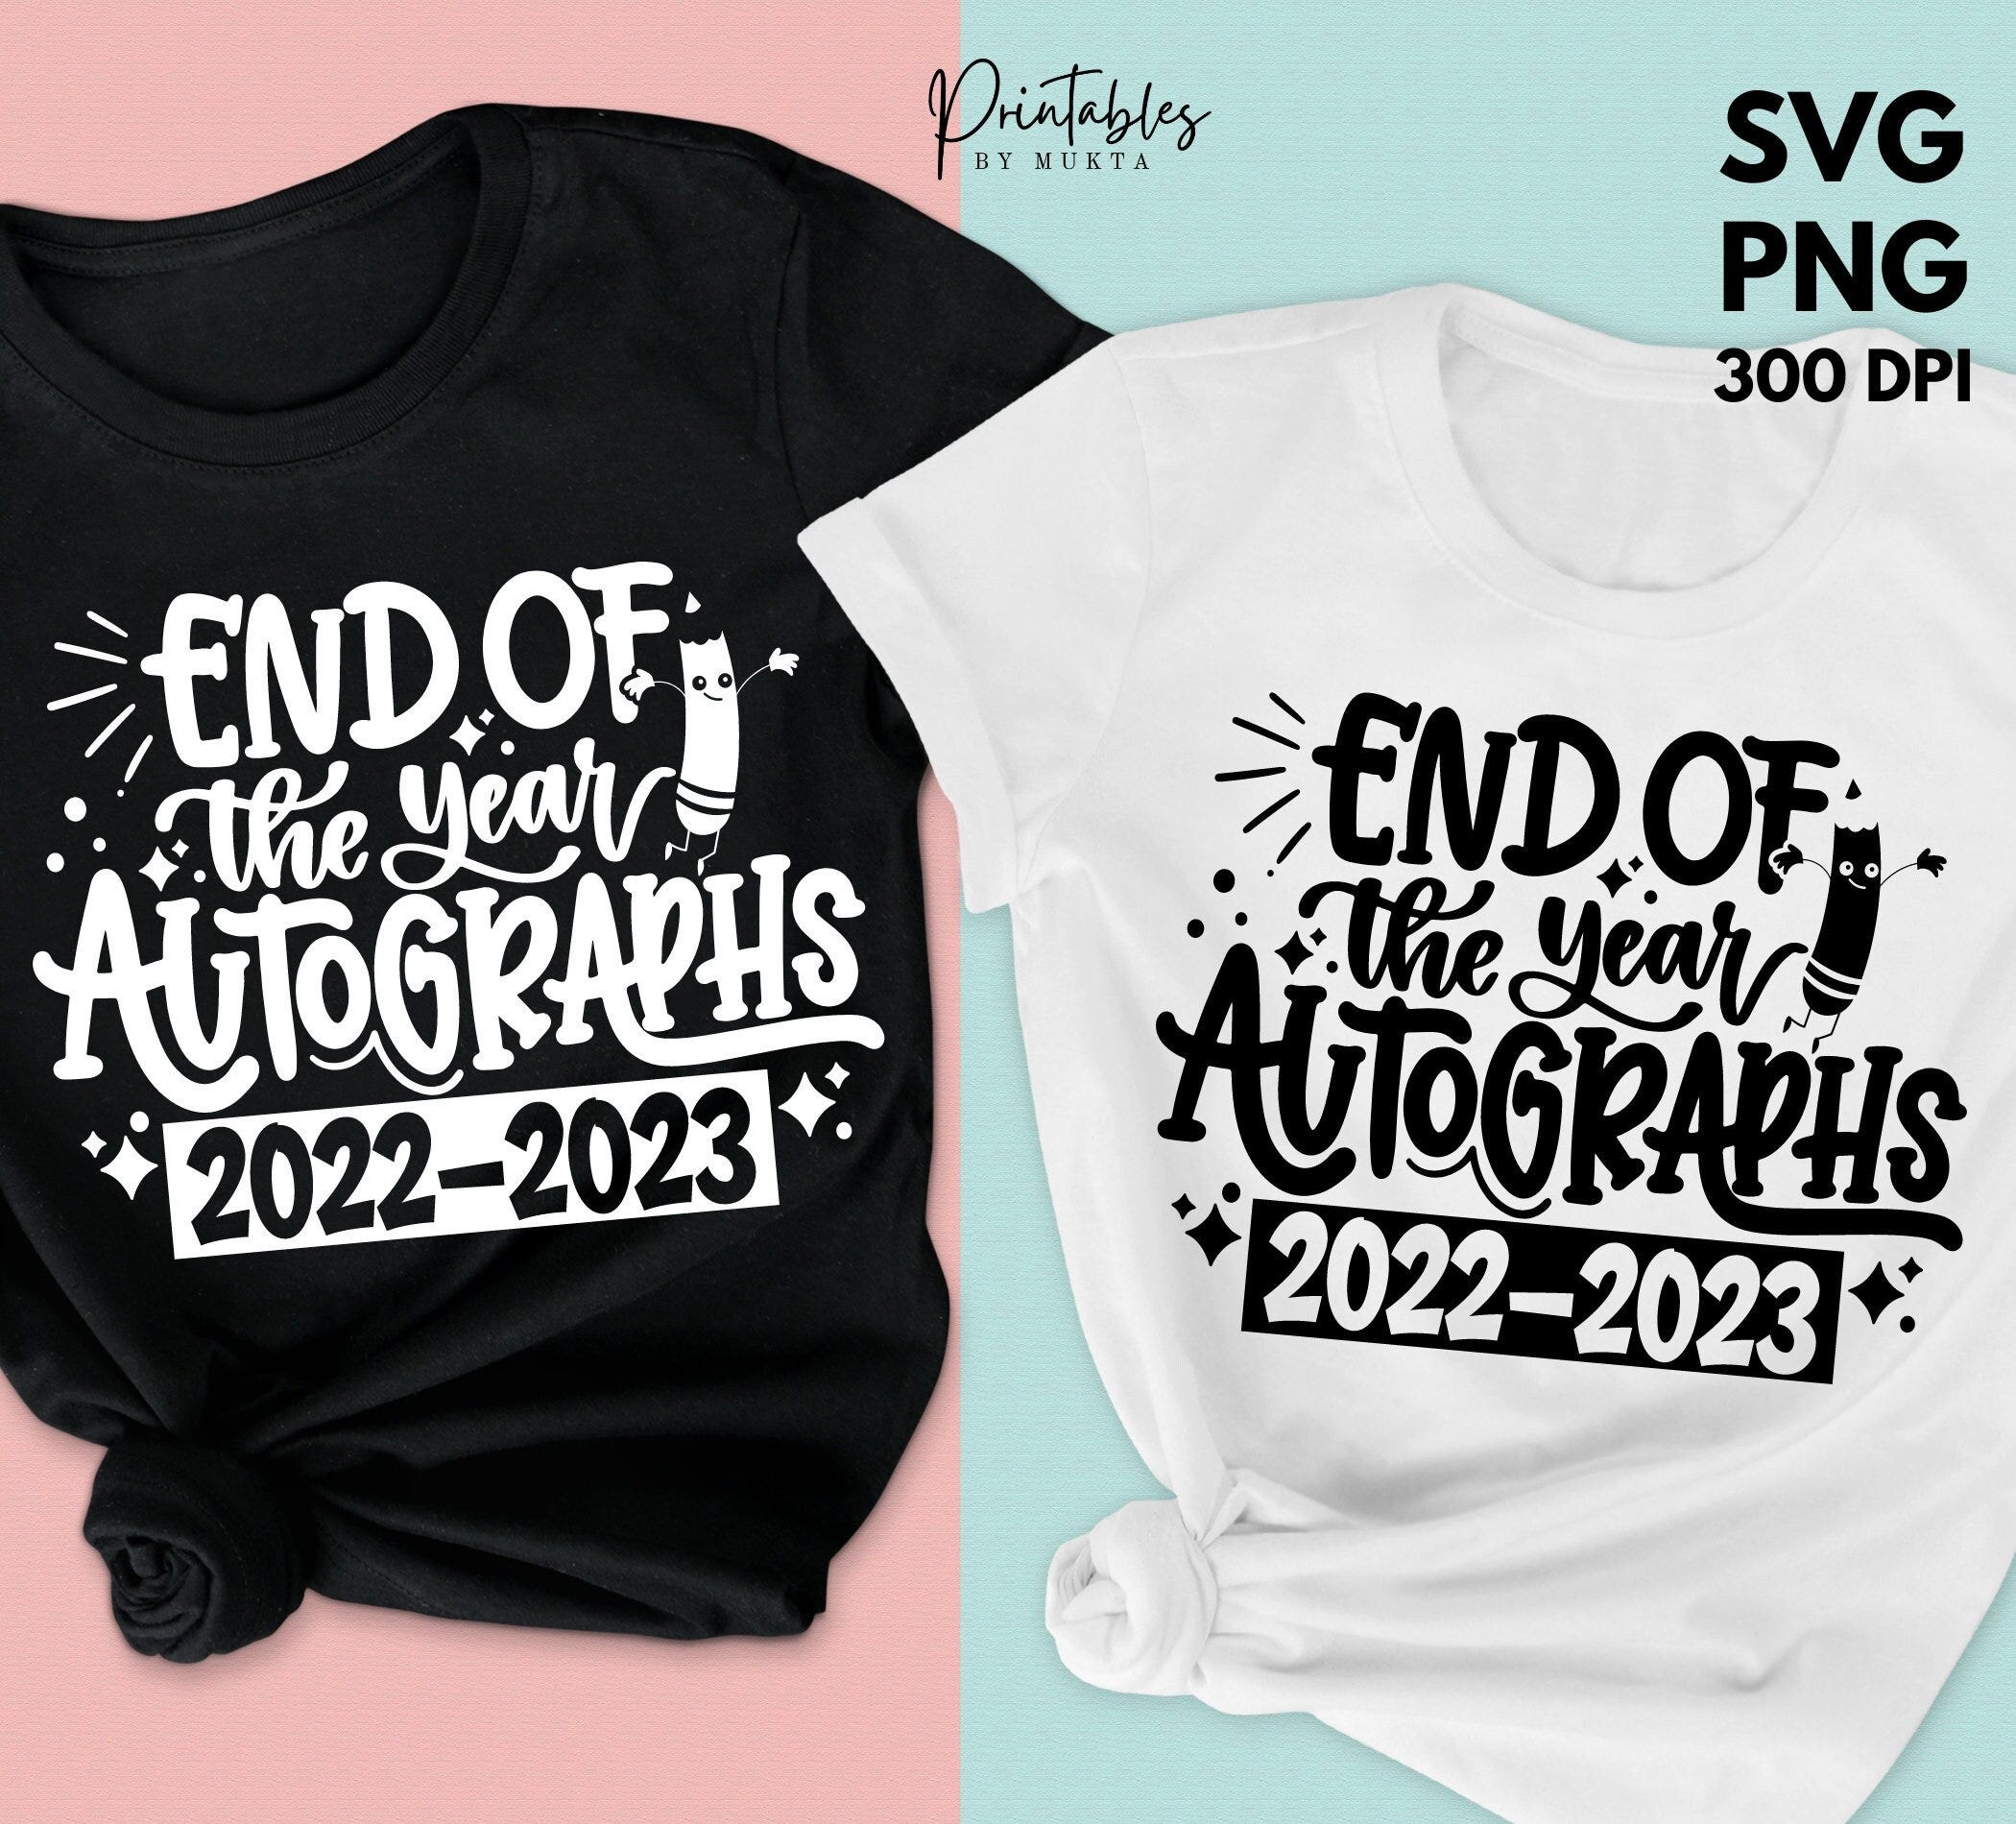 End Of The Year Autographs, Last Day autographs SVG, Last day of School SVG, Autograph Shirt SVG, End Of The School svg, Last day 2022-2023